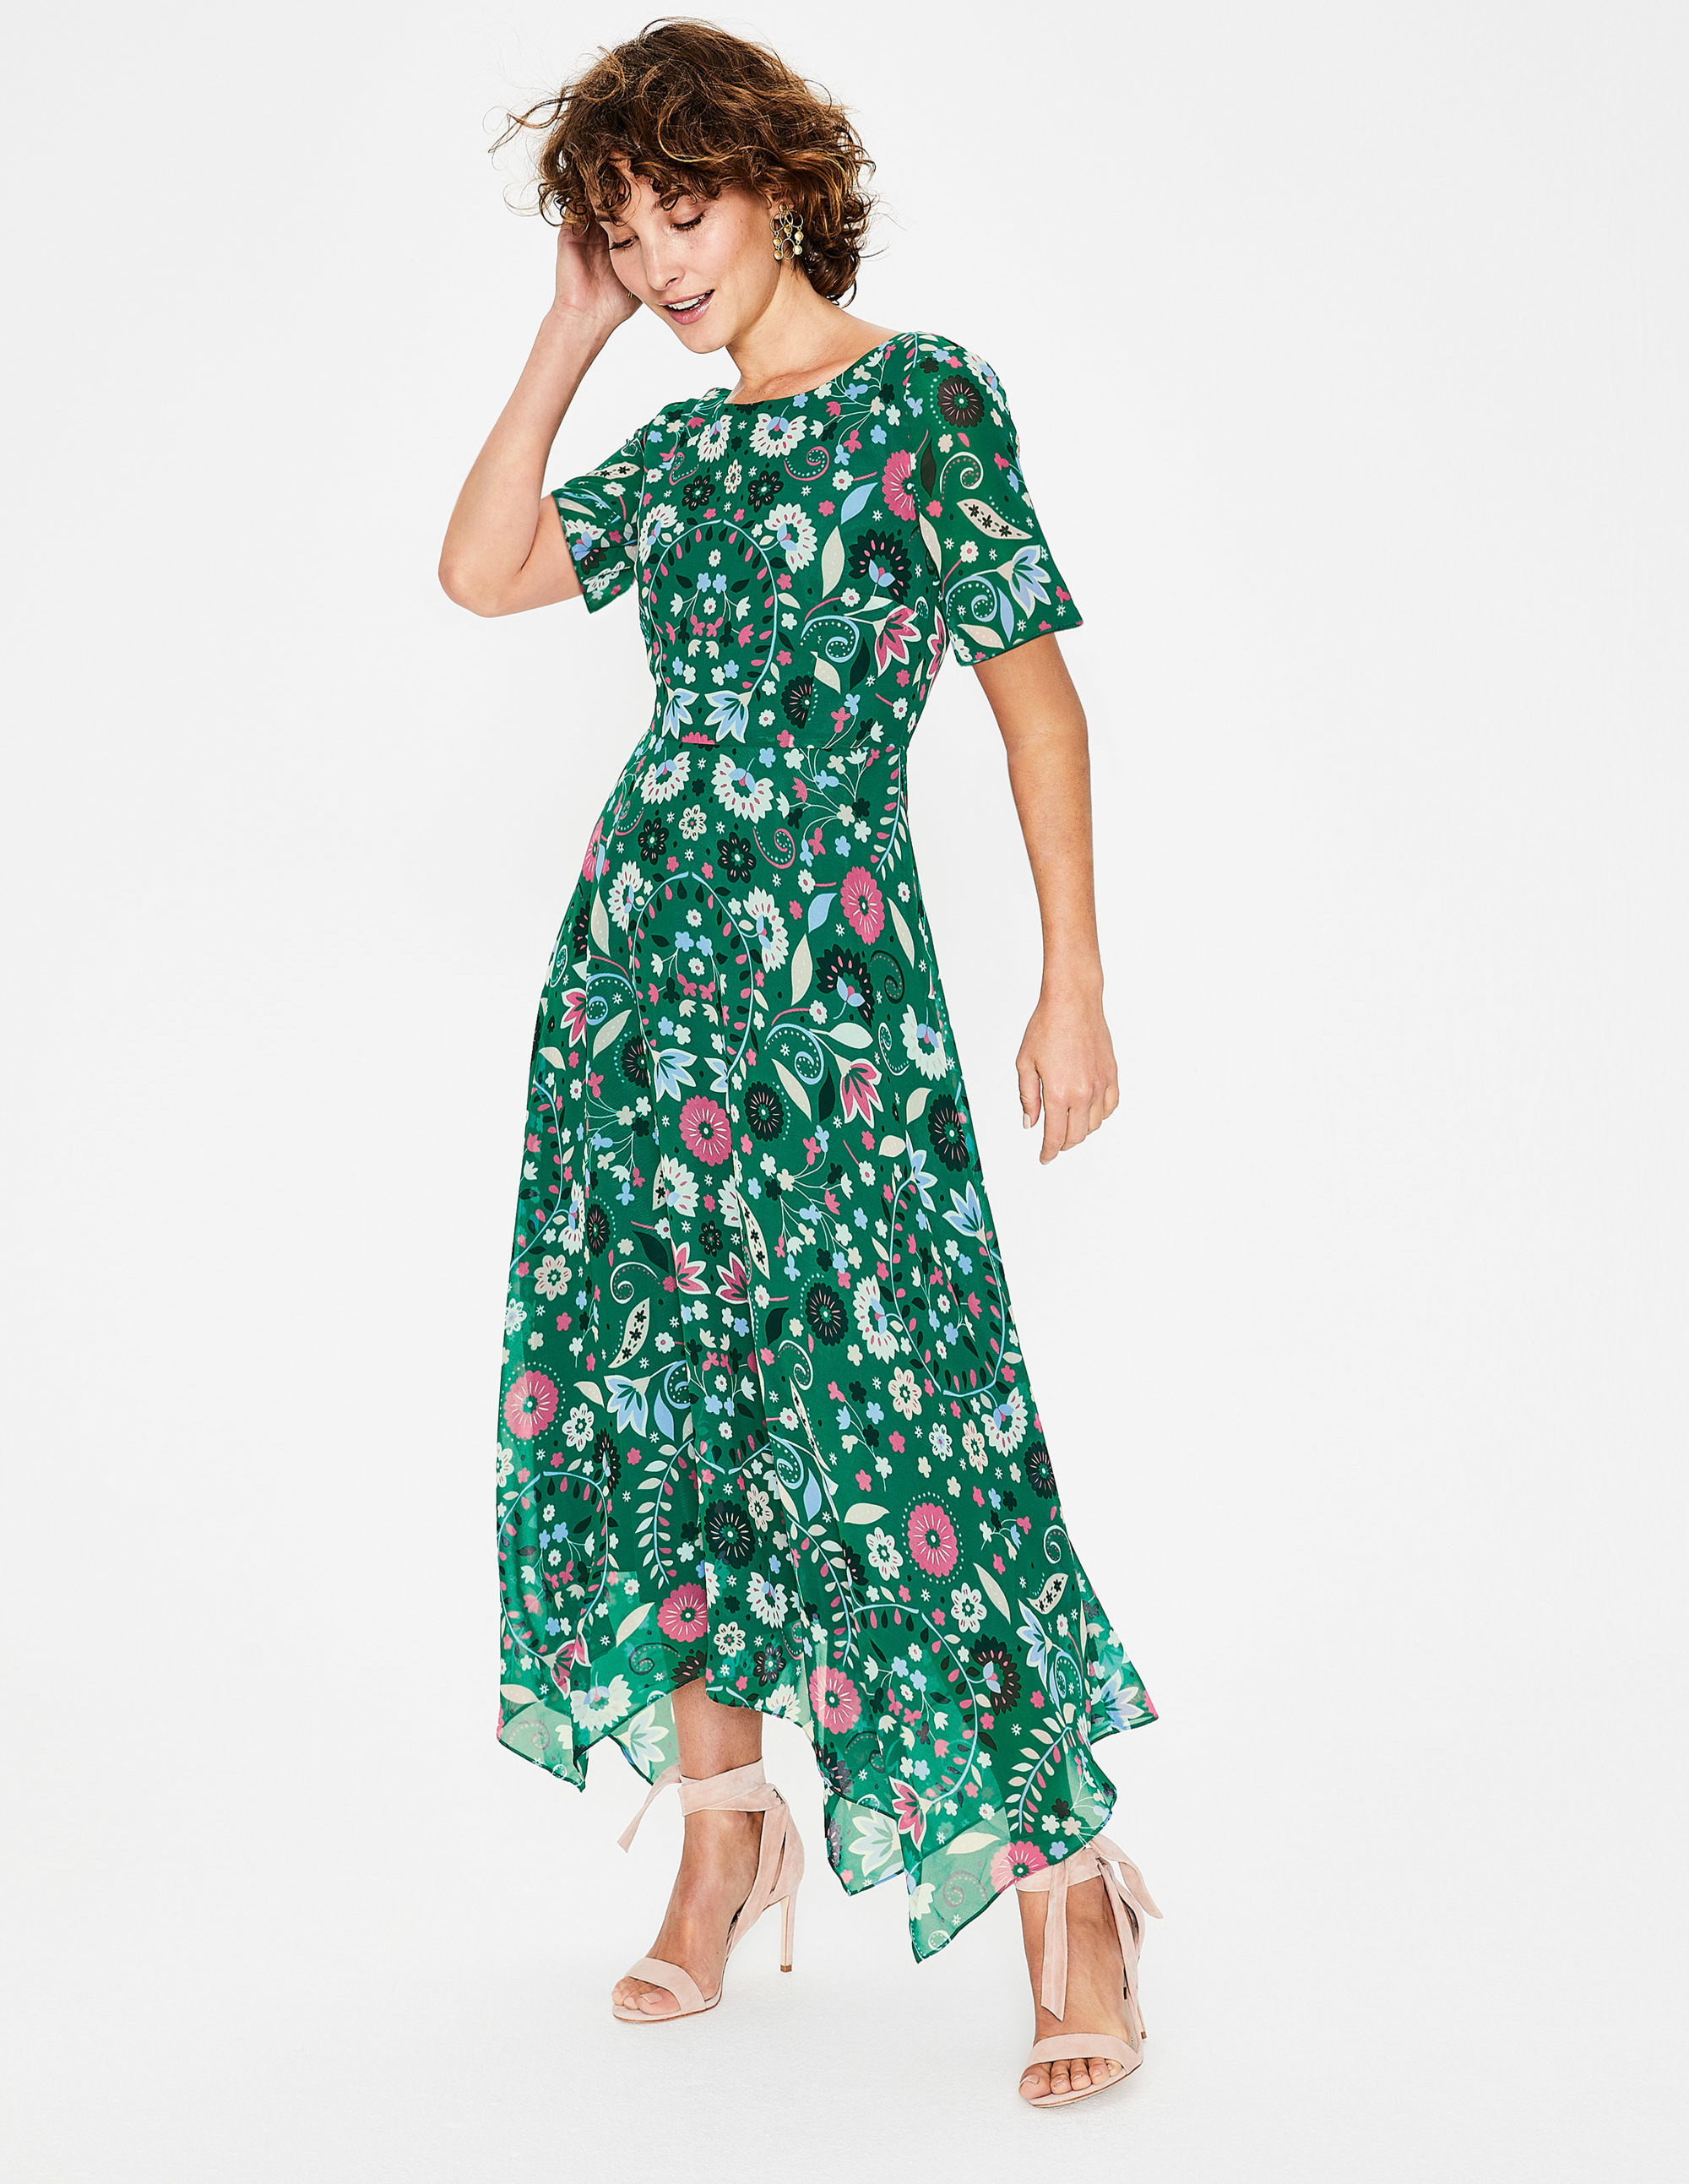 The Best Summer Wedding Guest Dresses On The